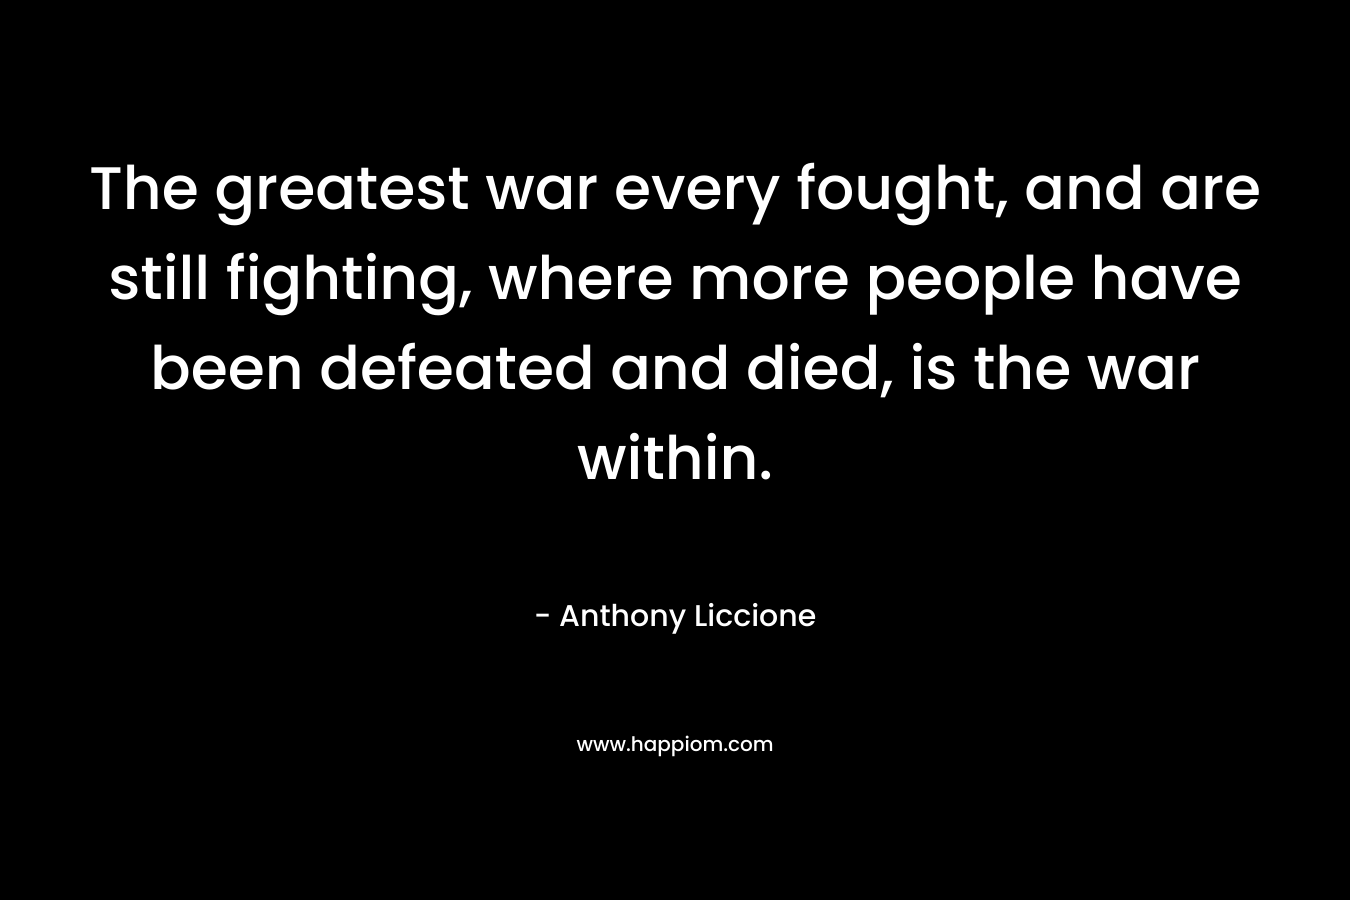 The greatest war every fought, and are still fighting, where more people have been defeated and died, is the war within.